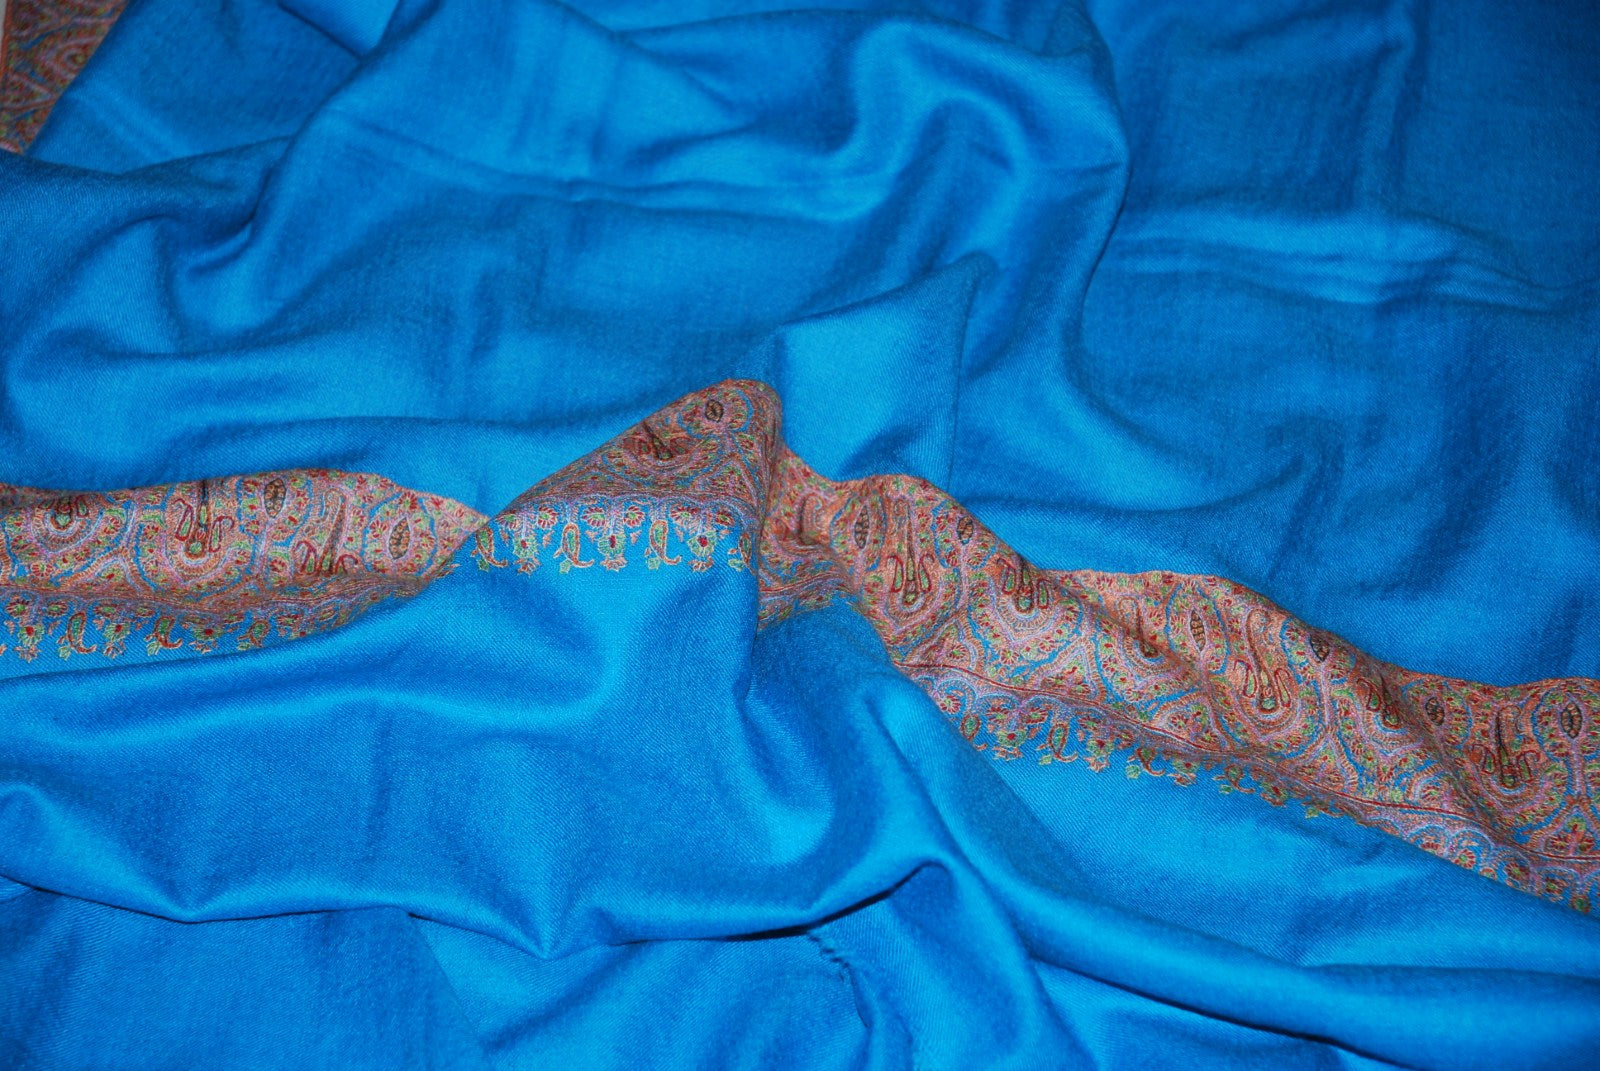 Multicolor Embroidery Handloom Pashmina "Cashmere" Shawl Blue Turquoise #PDR-012